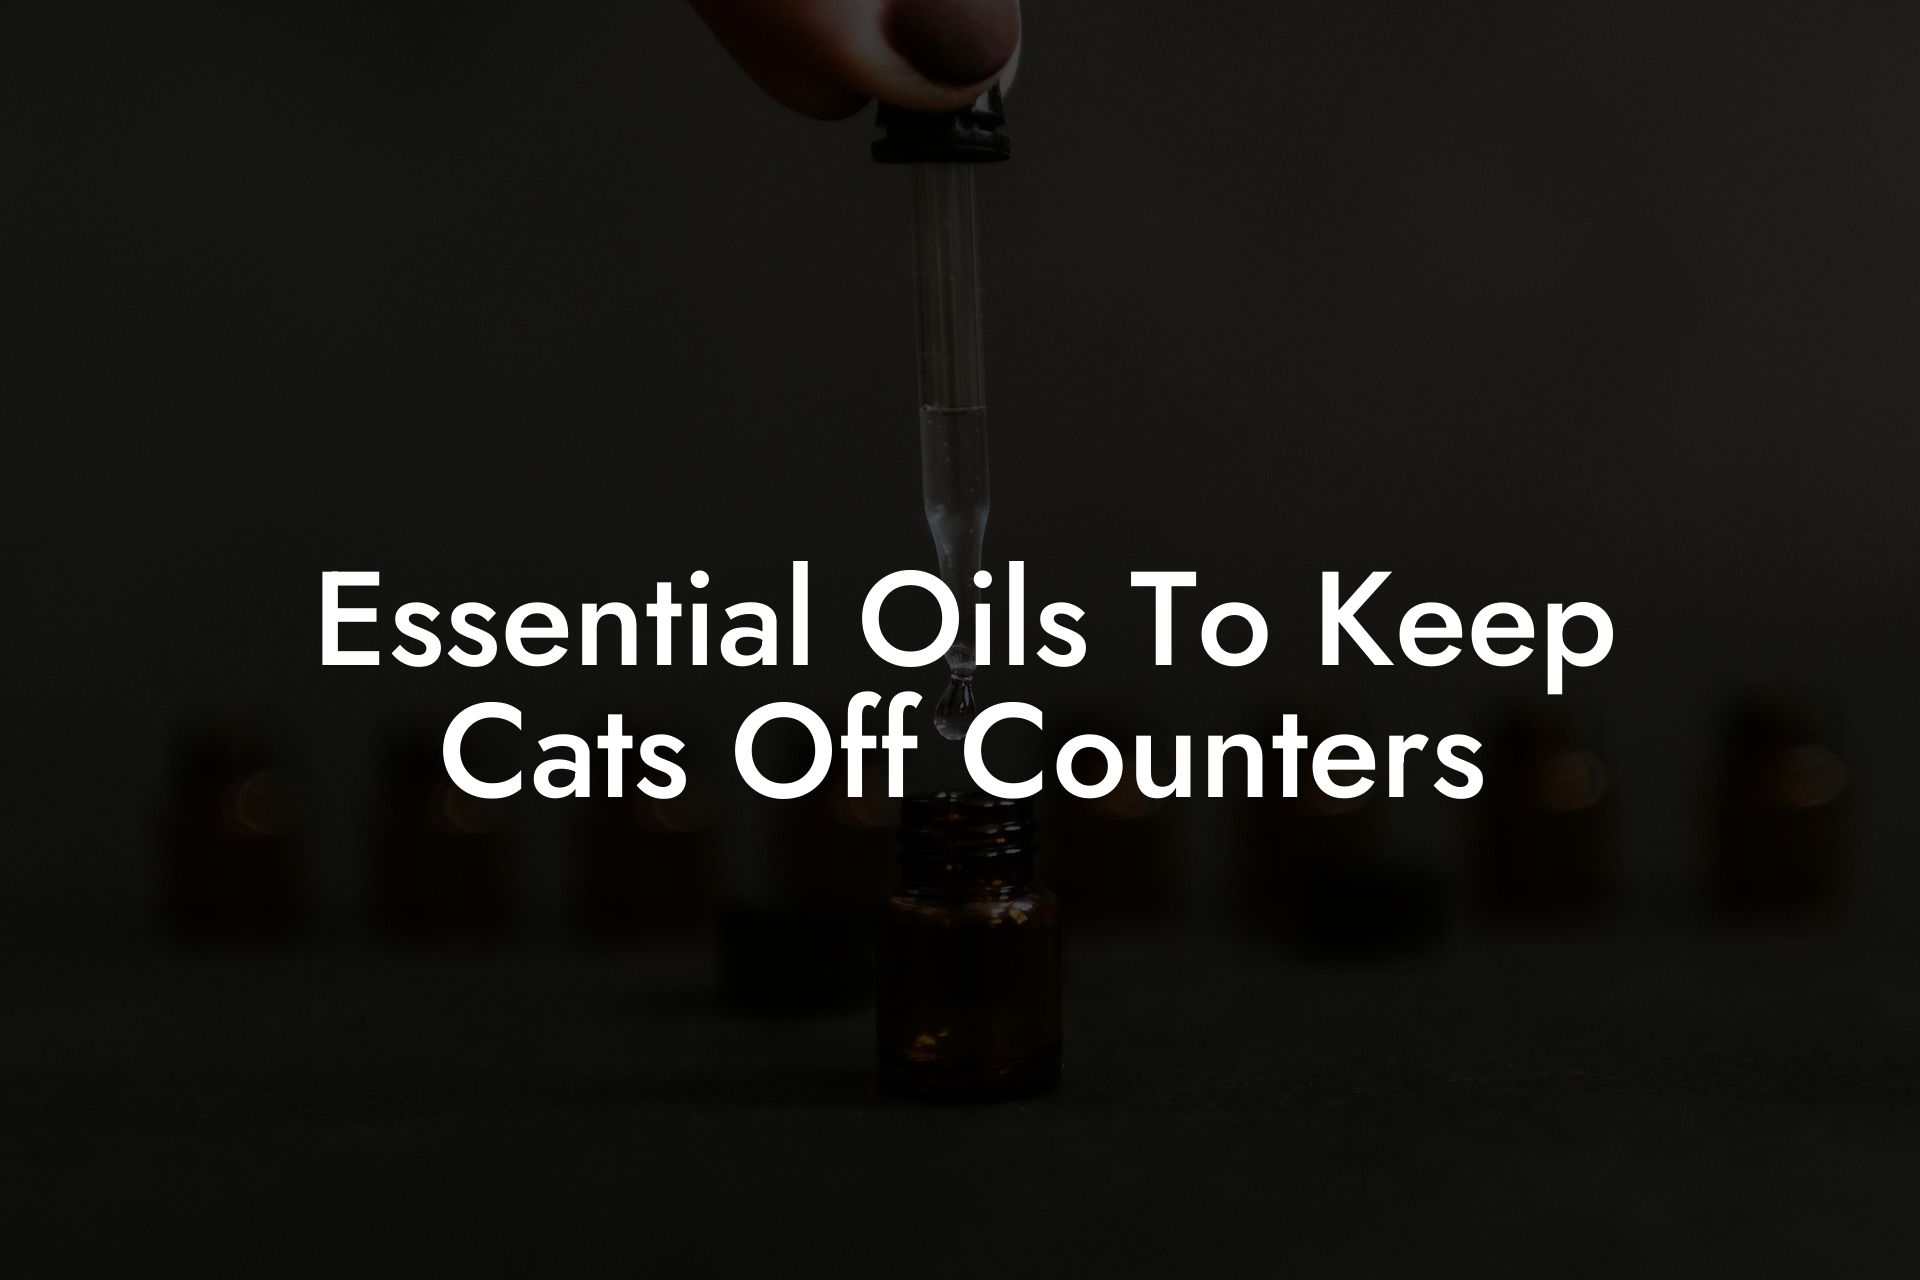 Essential Oils To Keep Cats Off Counters